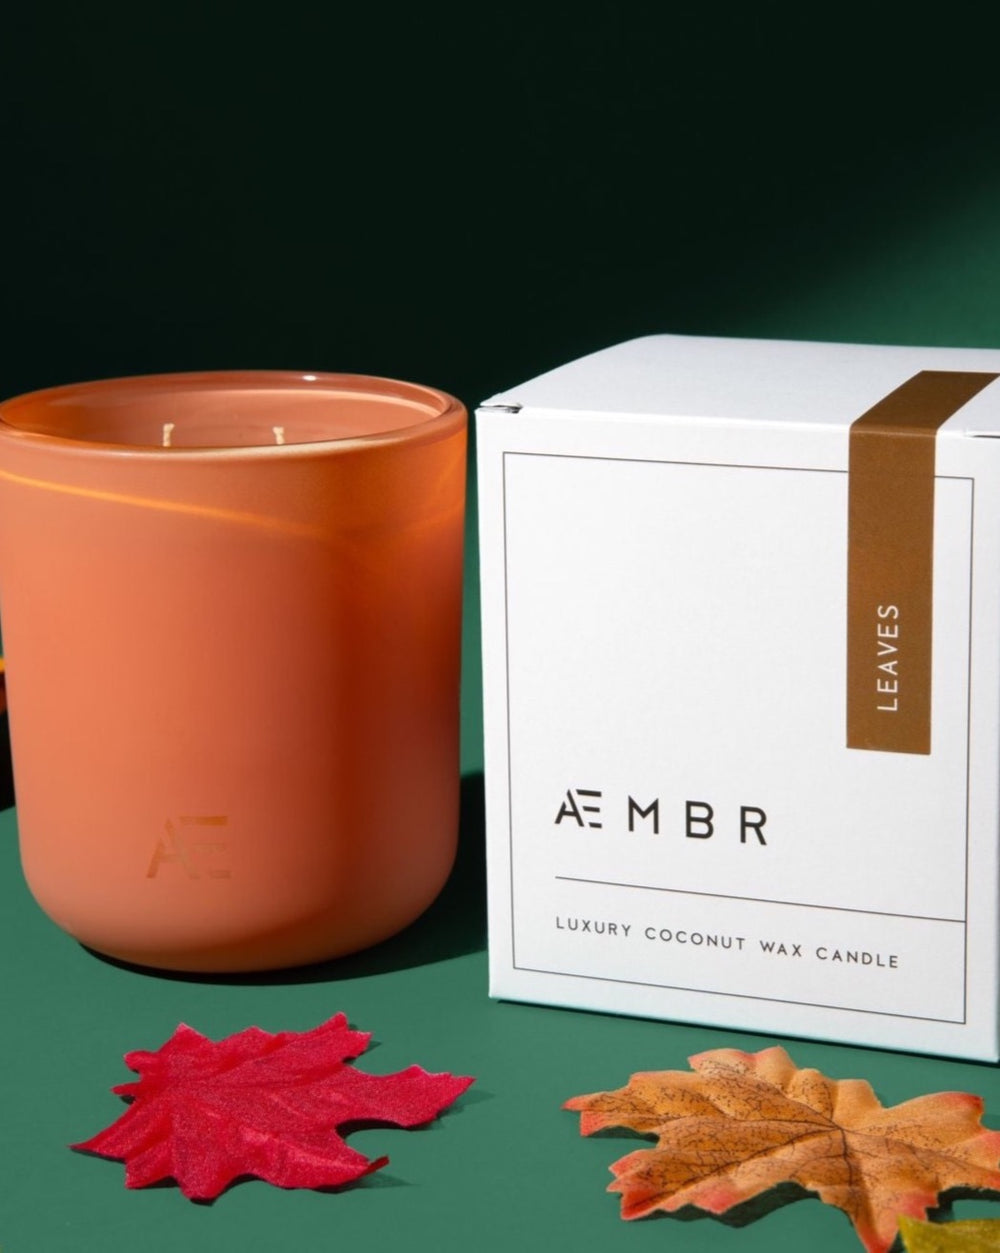 image of burnt Sienna candle jar on green backdrop next to white and black elegant candle box, leaves in foreground